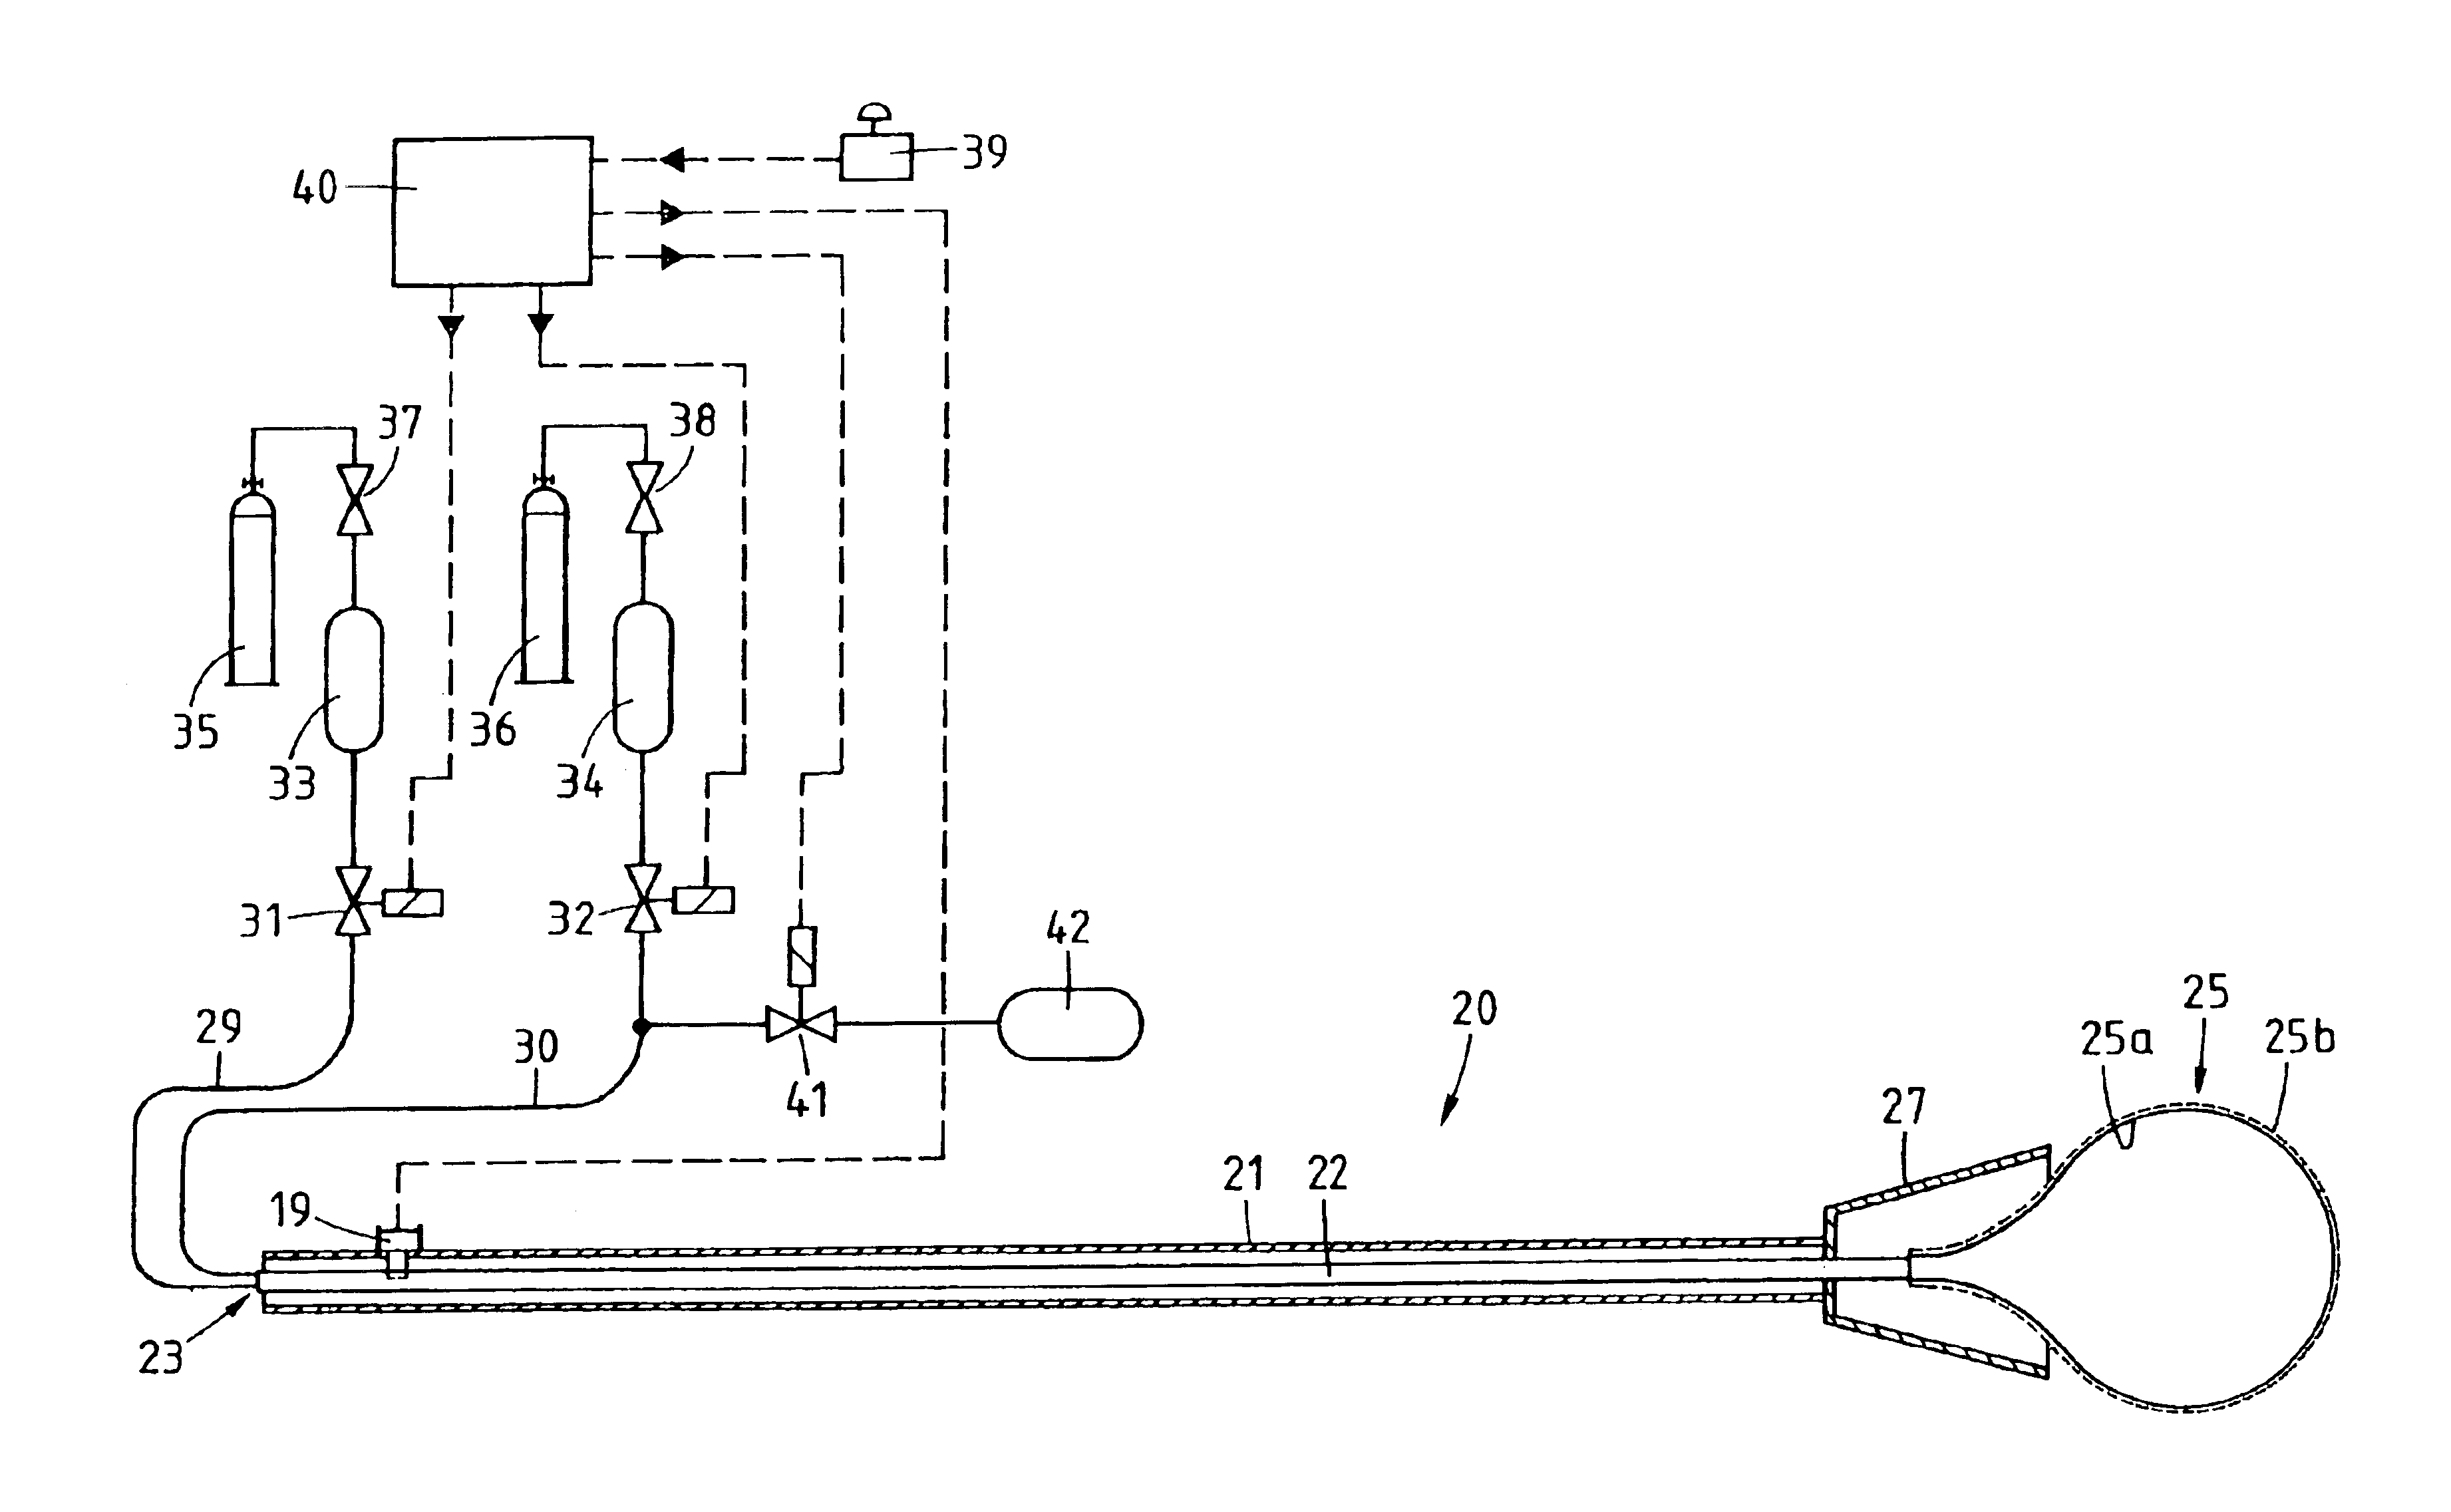 Method for cleaning combustion devices